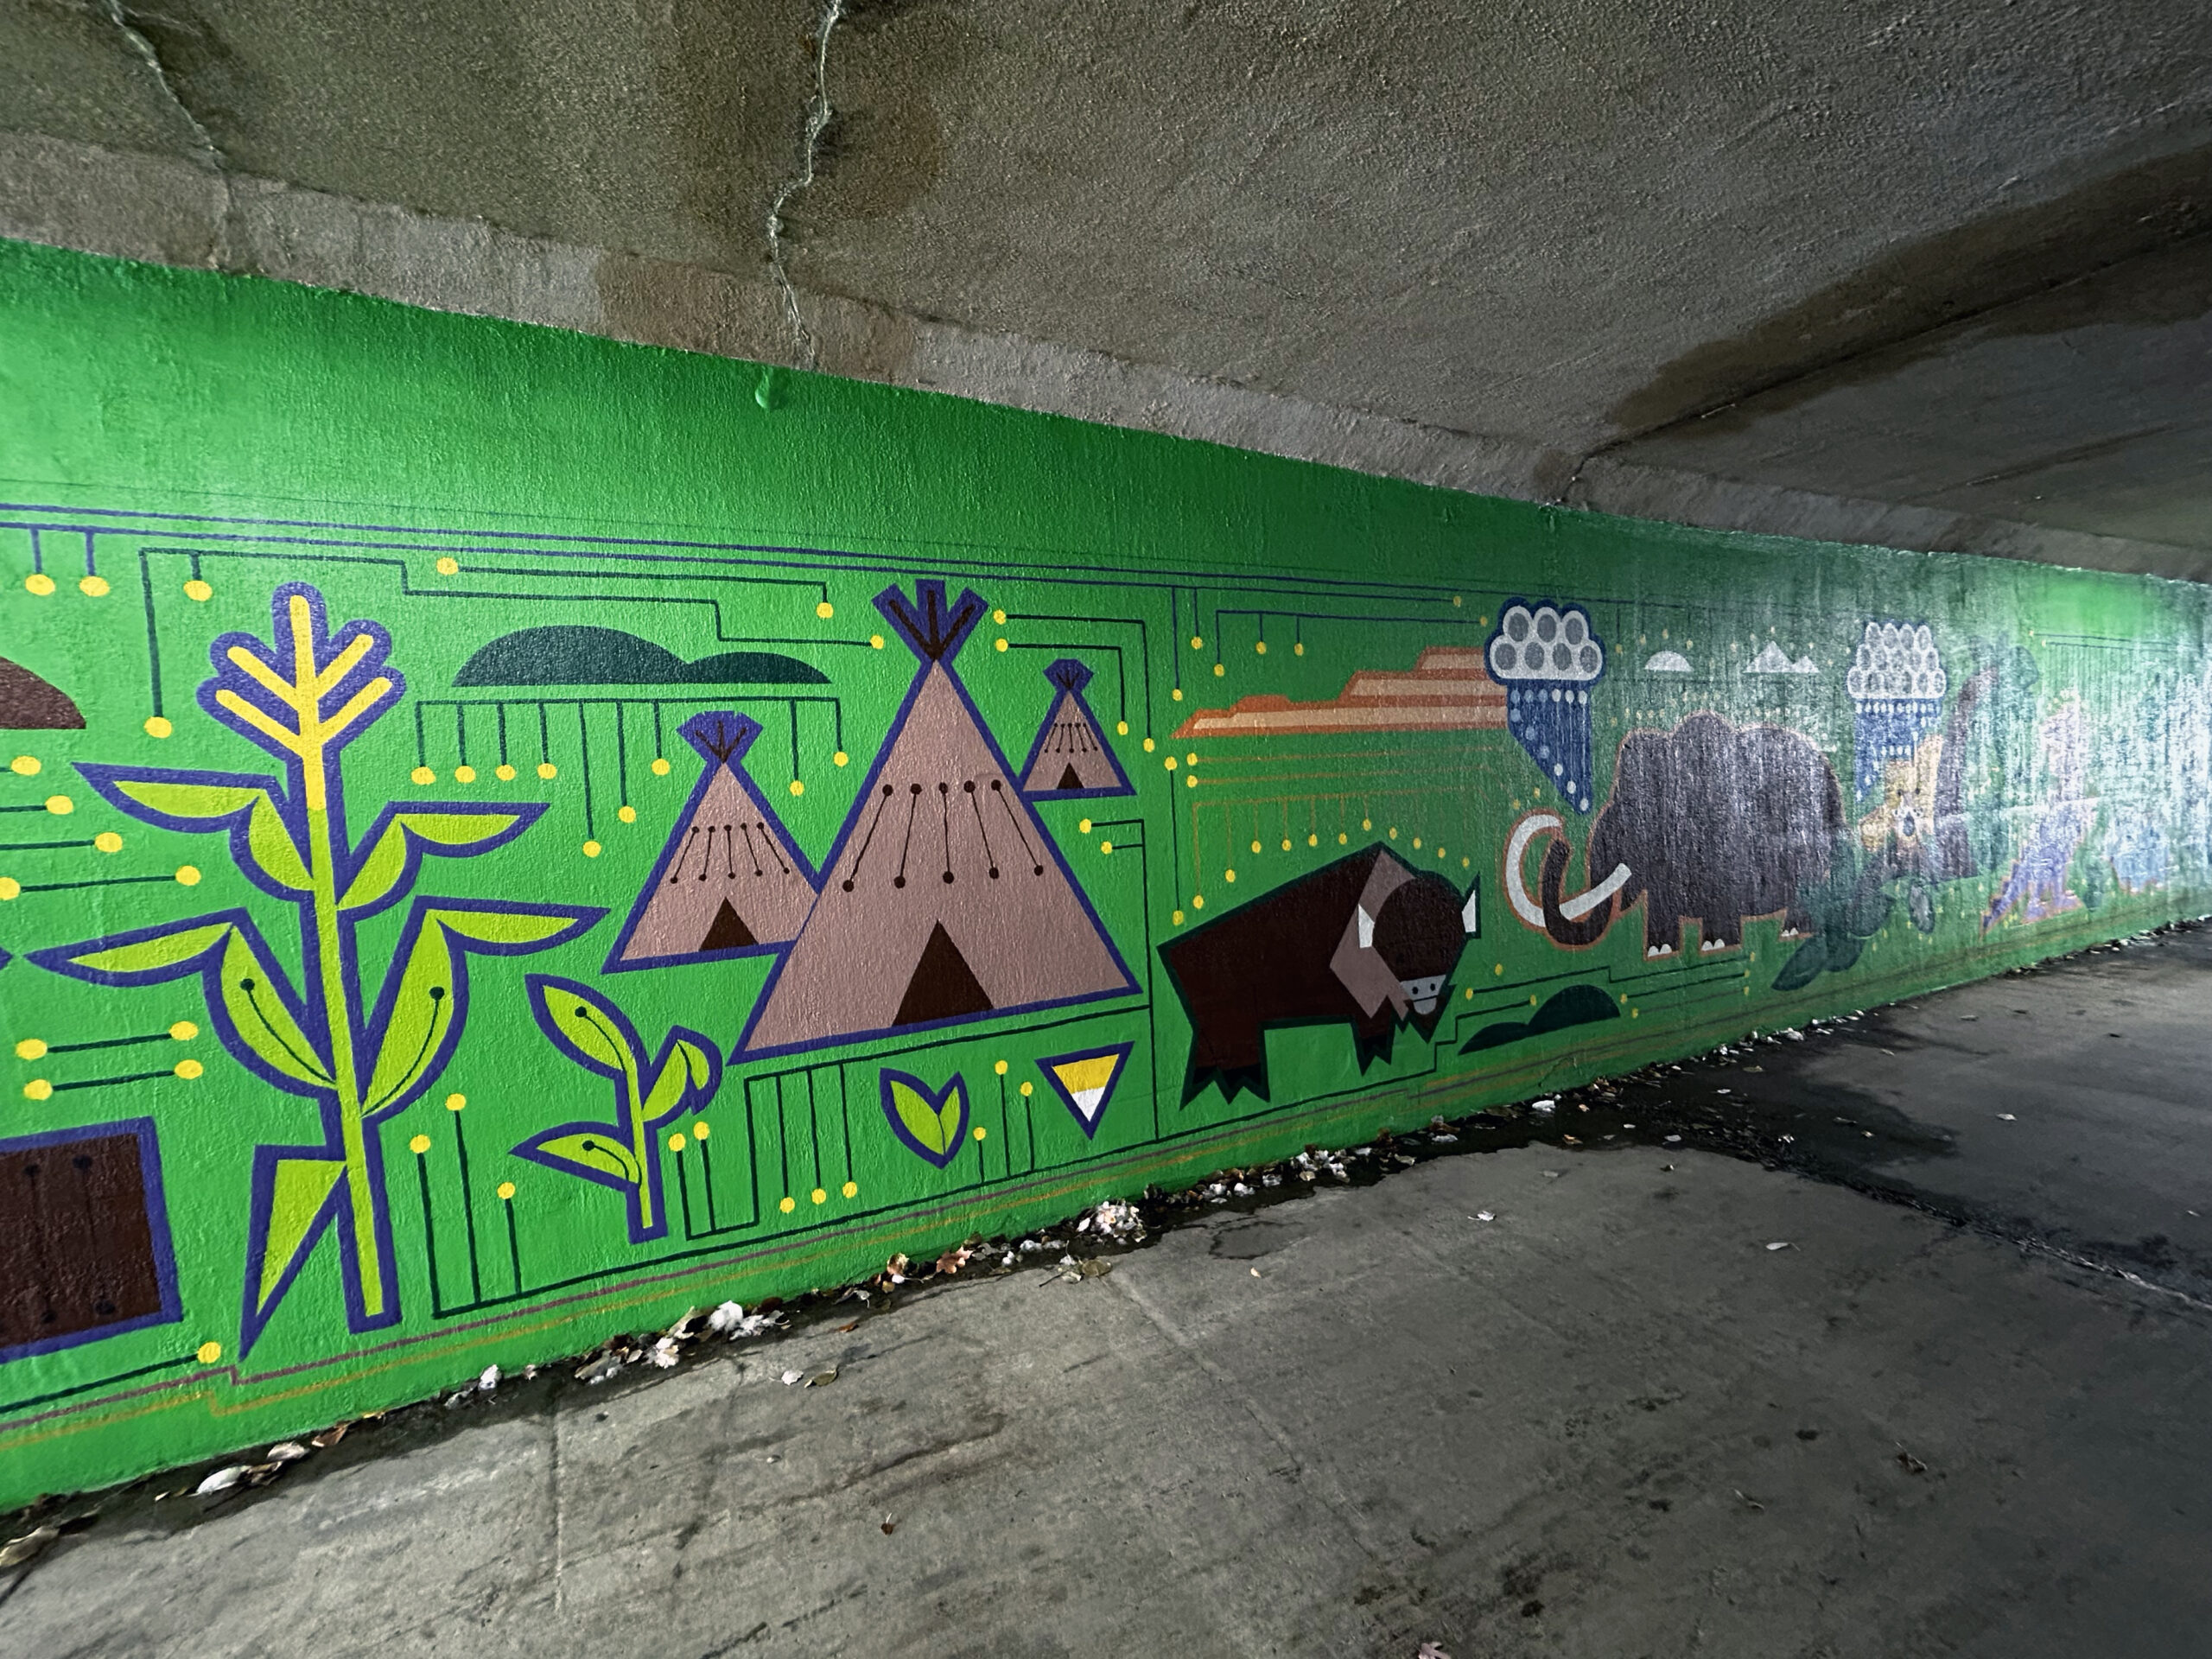 A green mural under a bridge showing corn, teepees, and buffalo